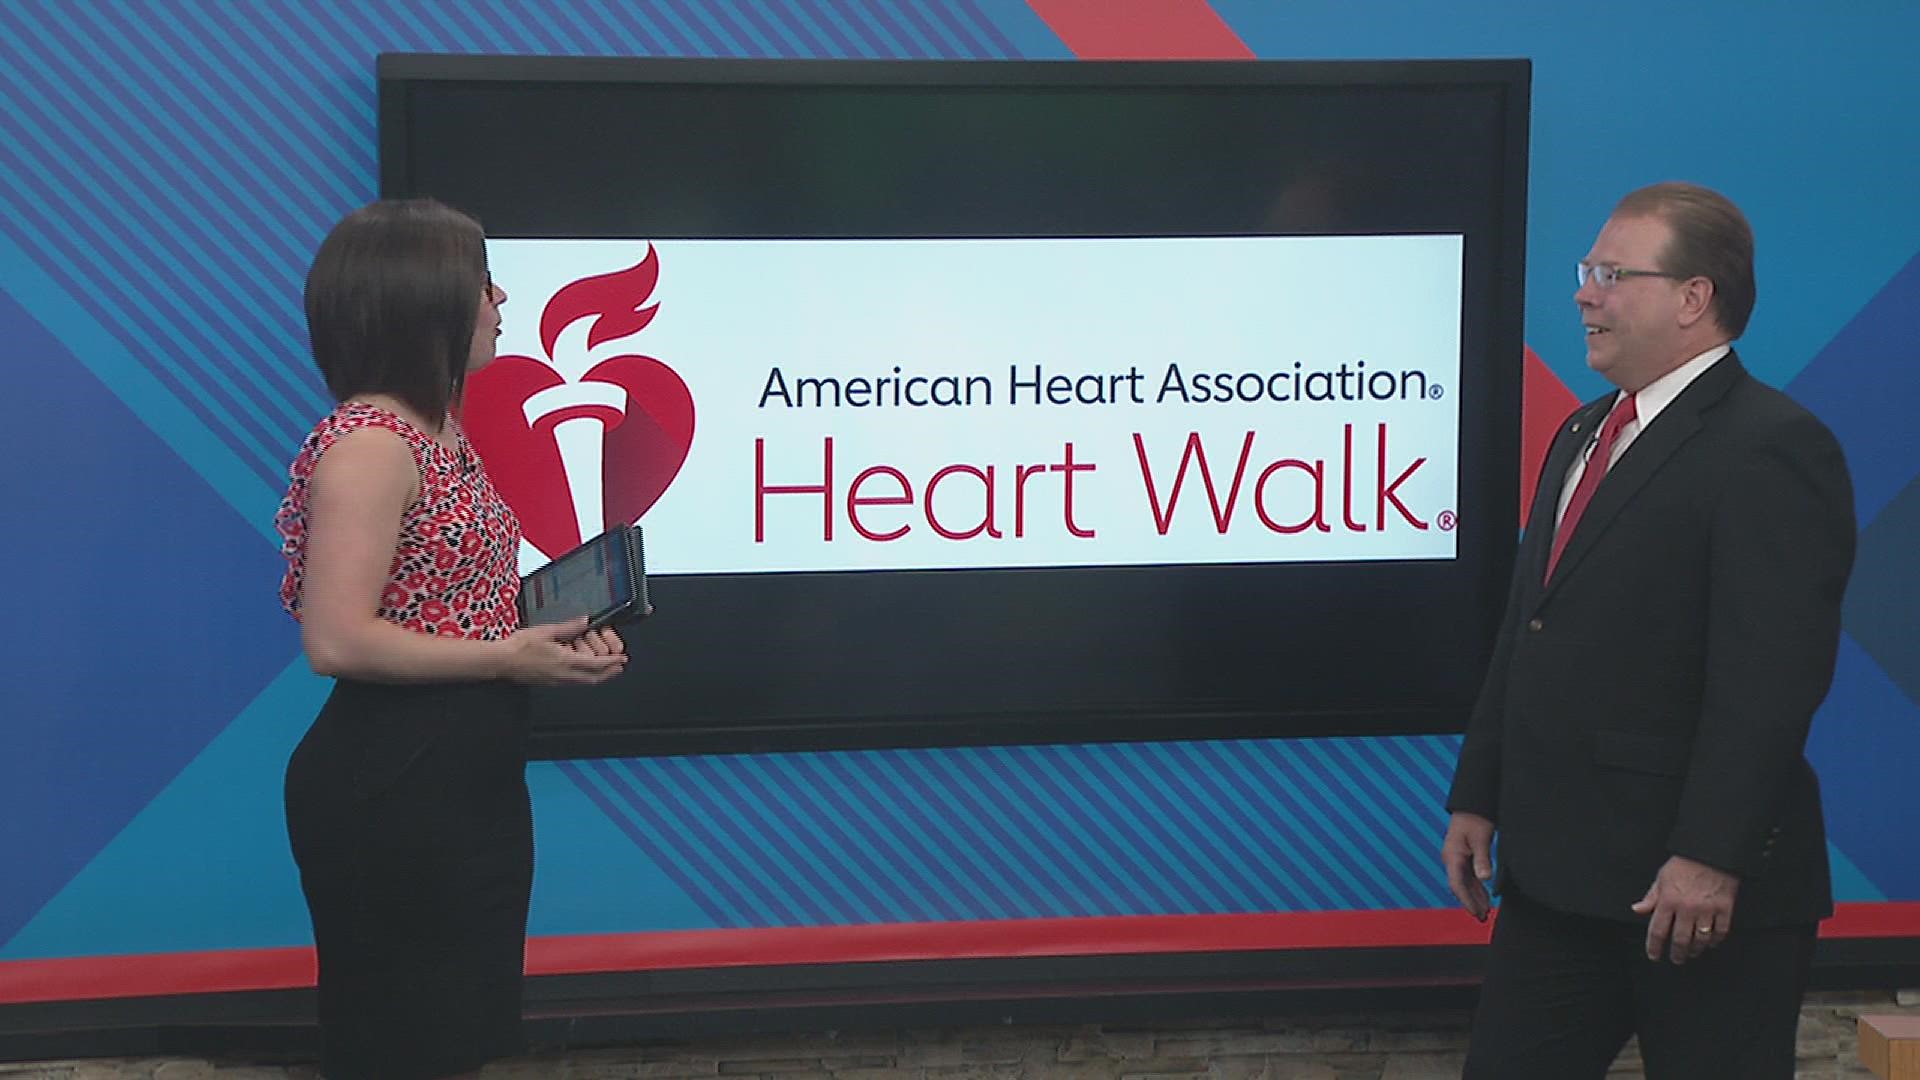 "We know that if we walk just 150 minutes per week, it makes an incredible difference in quality of life," Heart Walk Event Chair Scott Naumann said